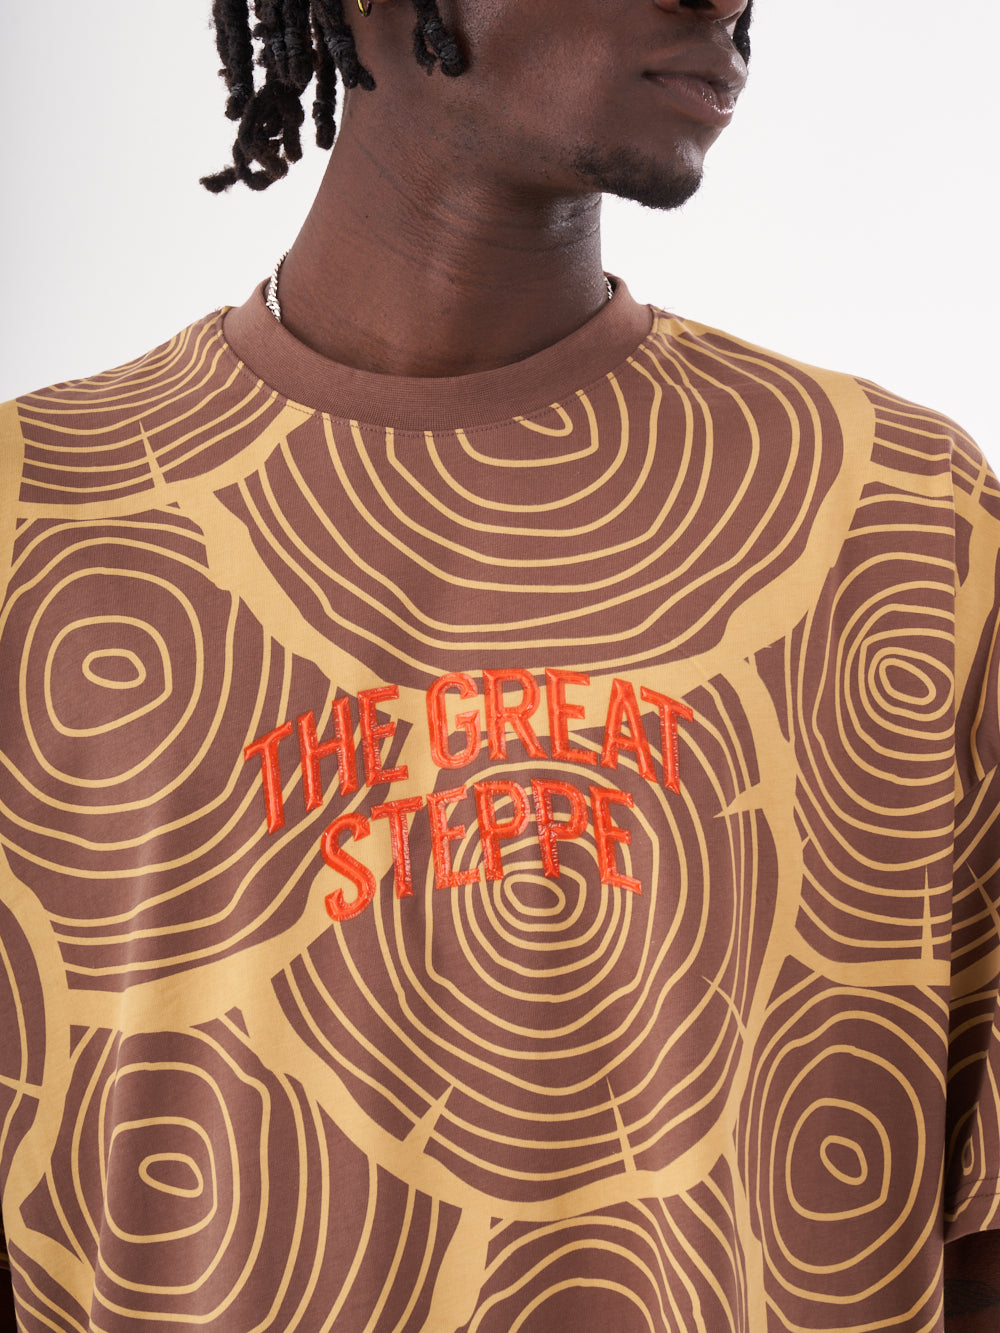 The great steppe t-shirt - brown.